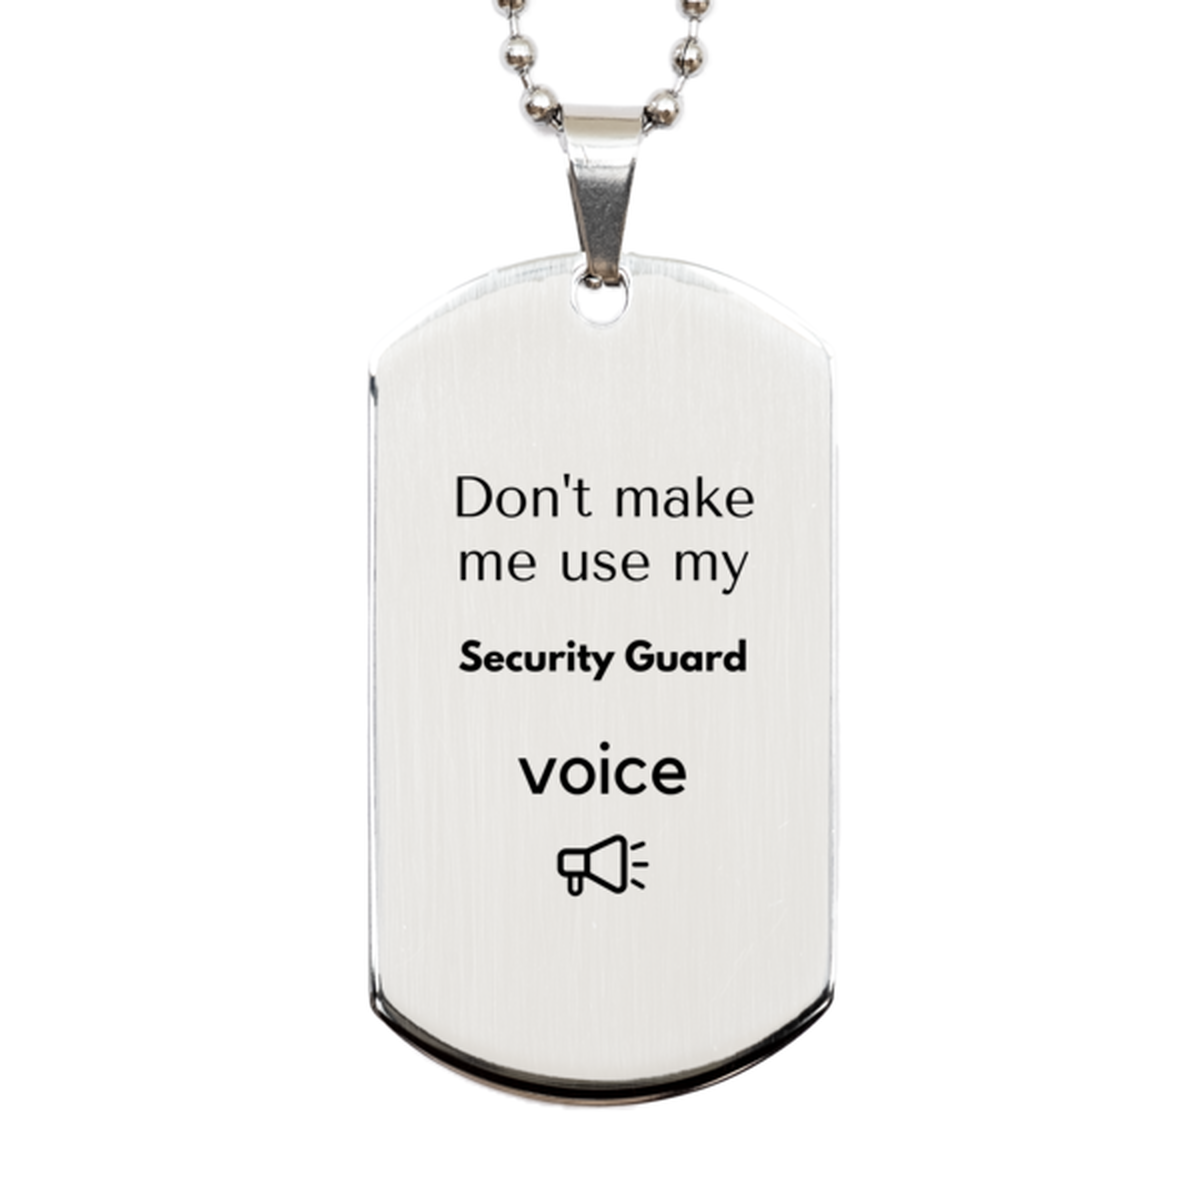 Don't make me use my Security Guard voice, Sarcasm Security Guard Gifts, Christmas Security Guard Silver Dog Tag Birthday Unique Gifts For Security Guard Coworkers, Men, Women, Colleague, Friends